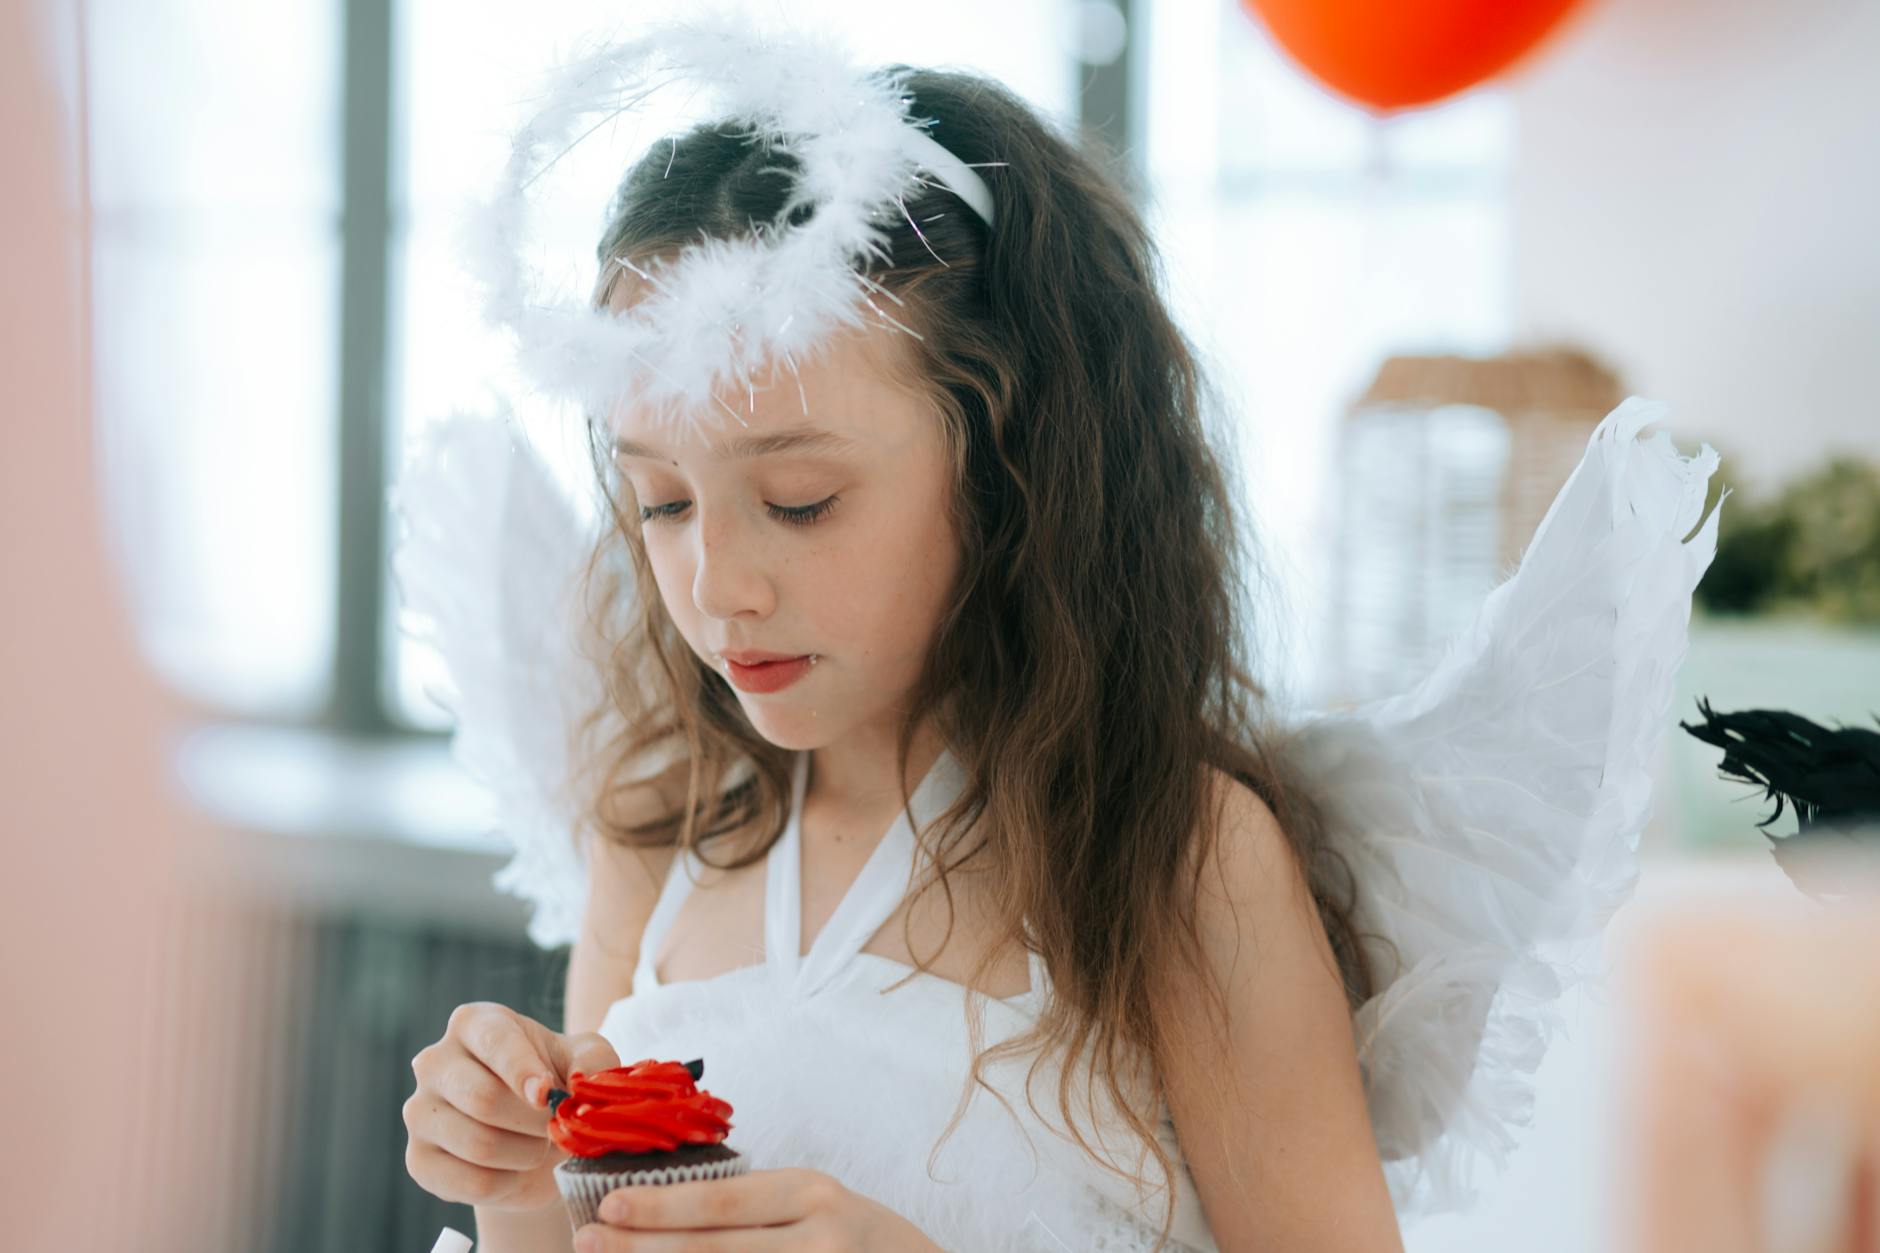 Girl in Angel Costume Holding a Cupcake